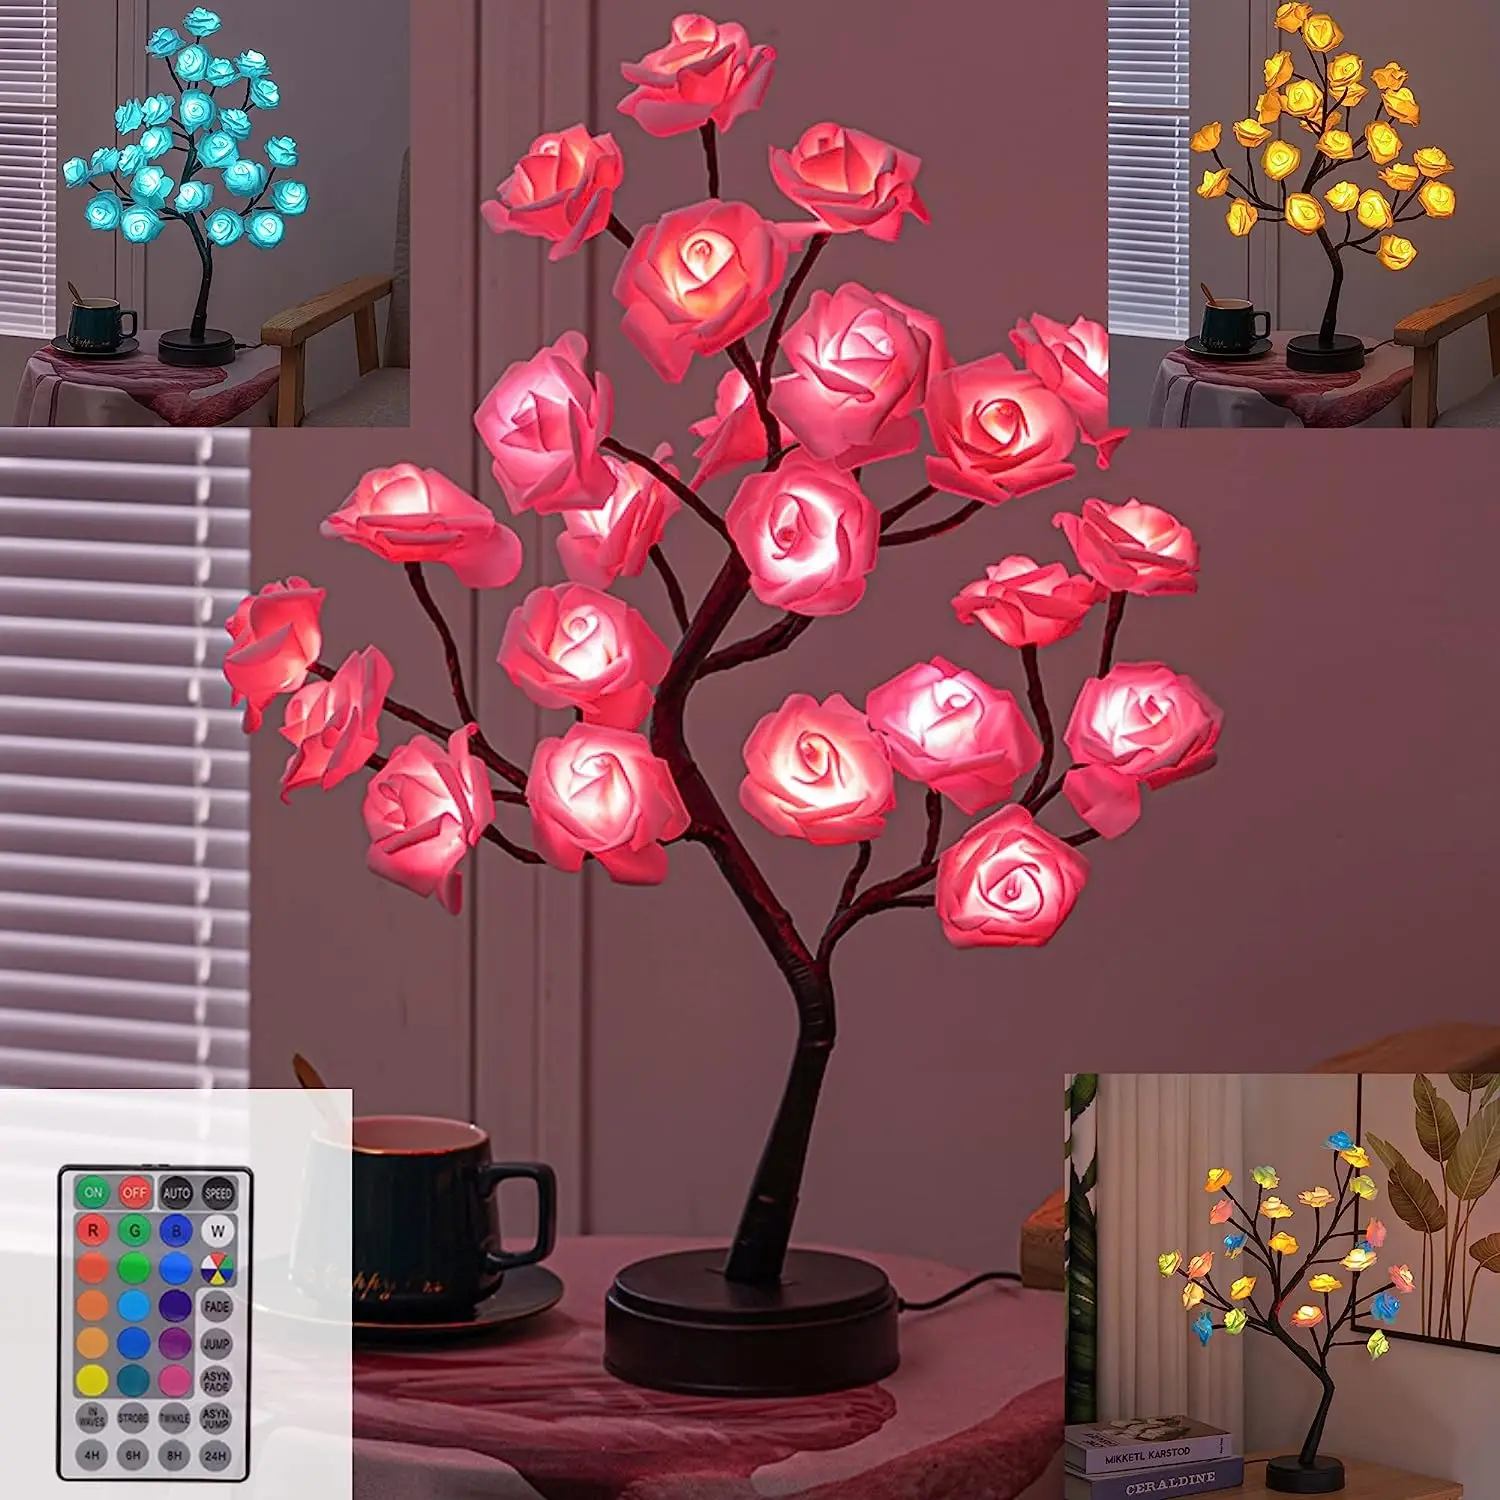 RGB Rose Flower Tree Lights 24LED USB Battery Table Lamp Fairy Night Light Home Party Christmas Wedding Bedroom Decoration Gift led table lamp rose flower tree usb night light home decoration led table lamp party christmas wedding bedroom decoration